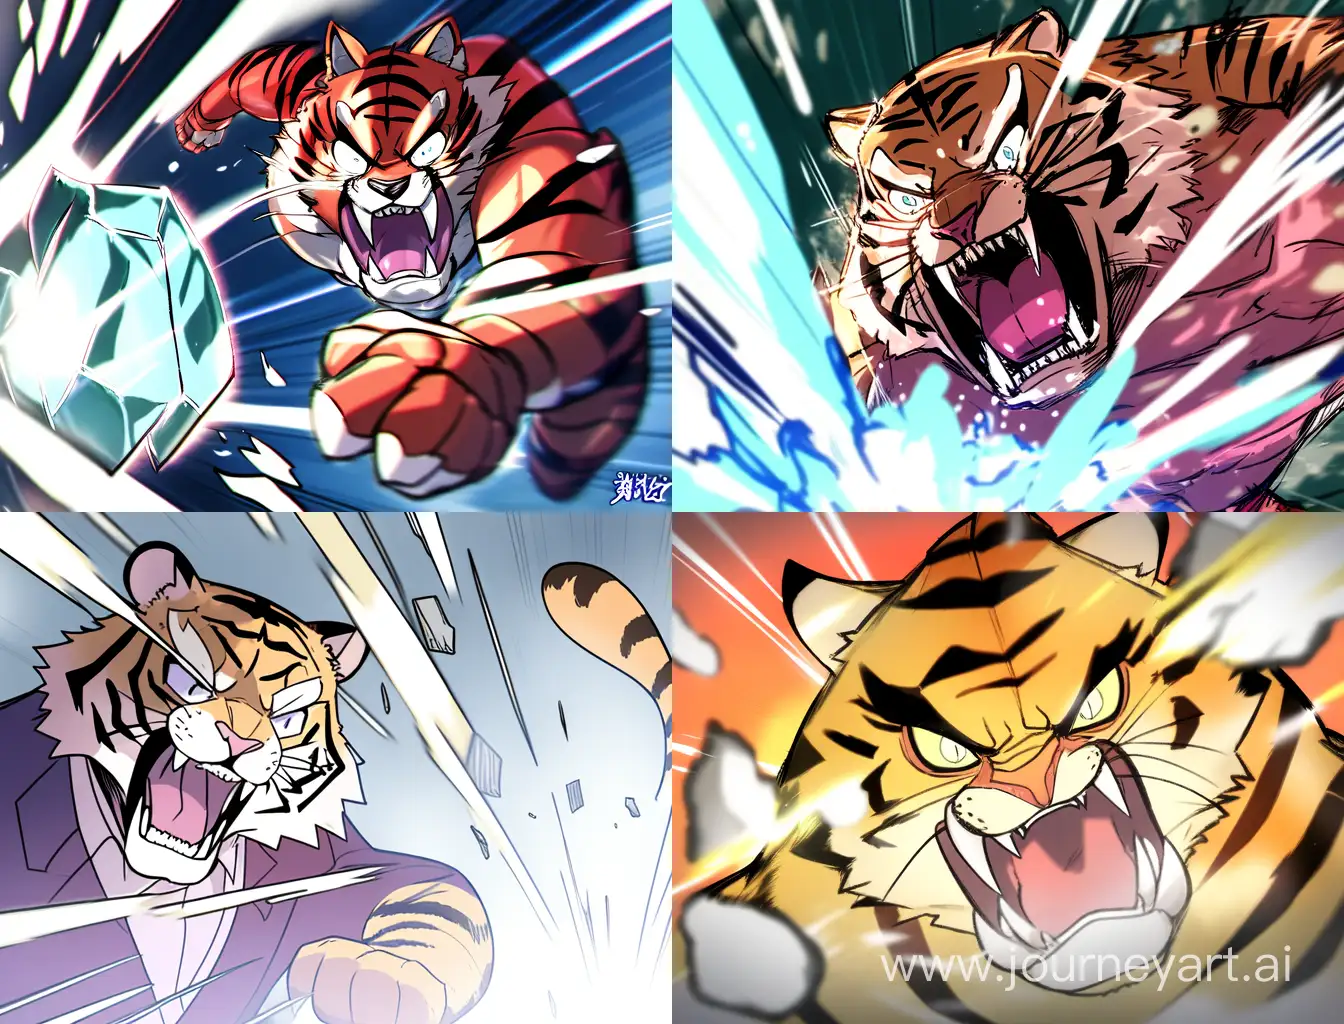 Powerful-Tiger-Shattering-Glass-in-a-Fiery-Display